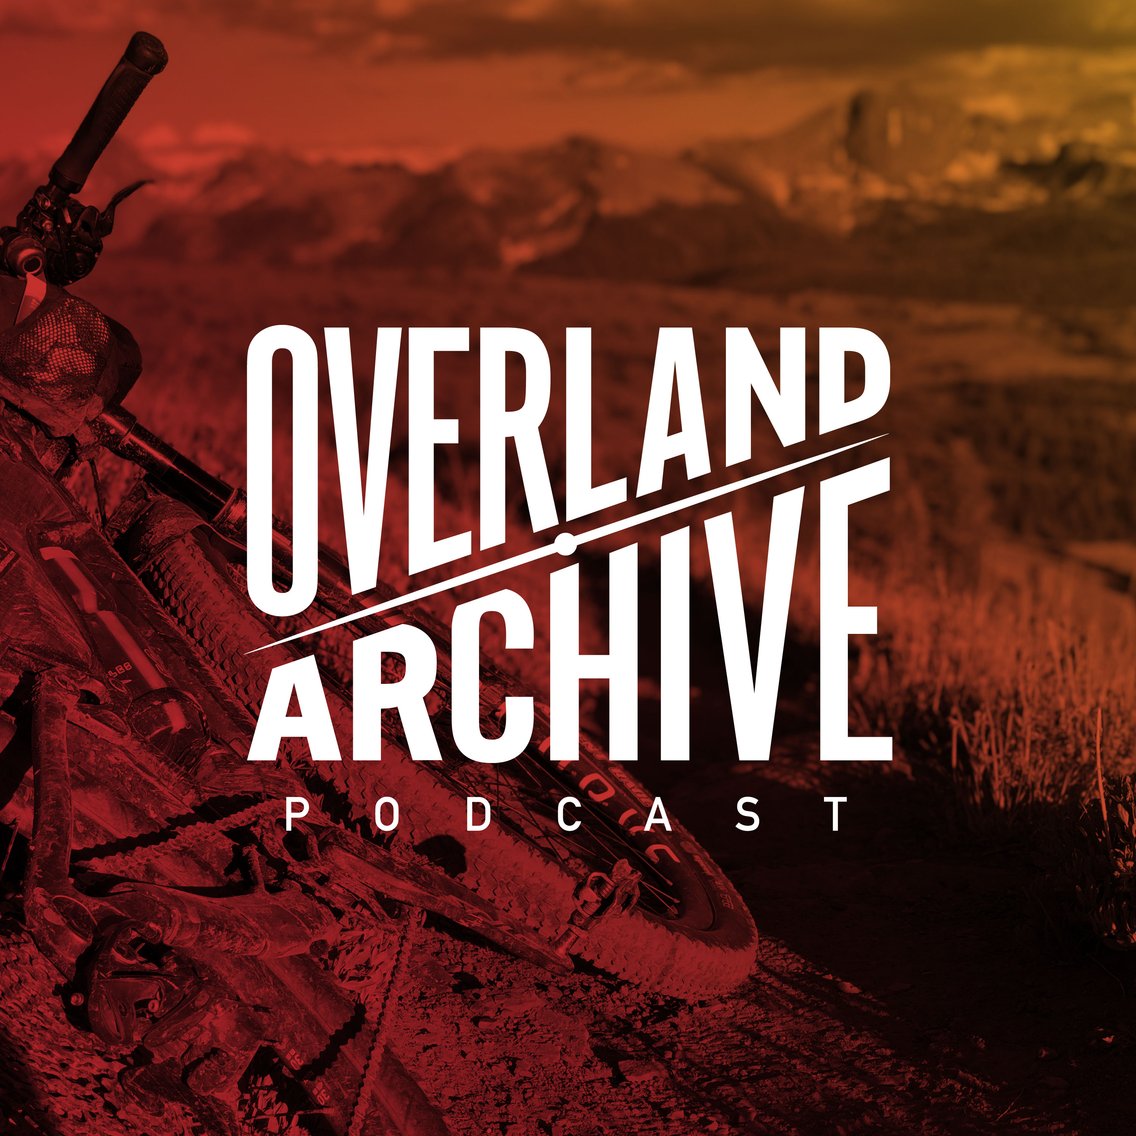 Overland Archive Podcast - Cover Image